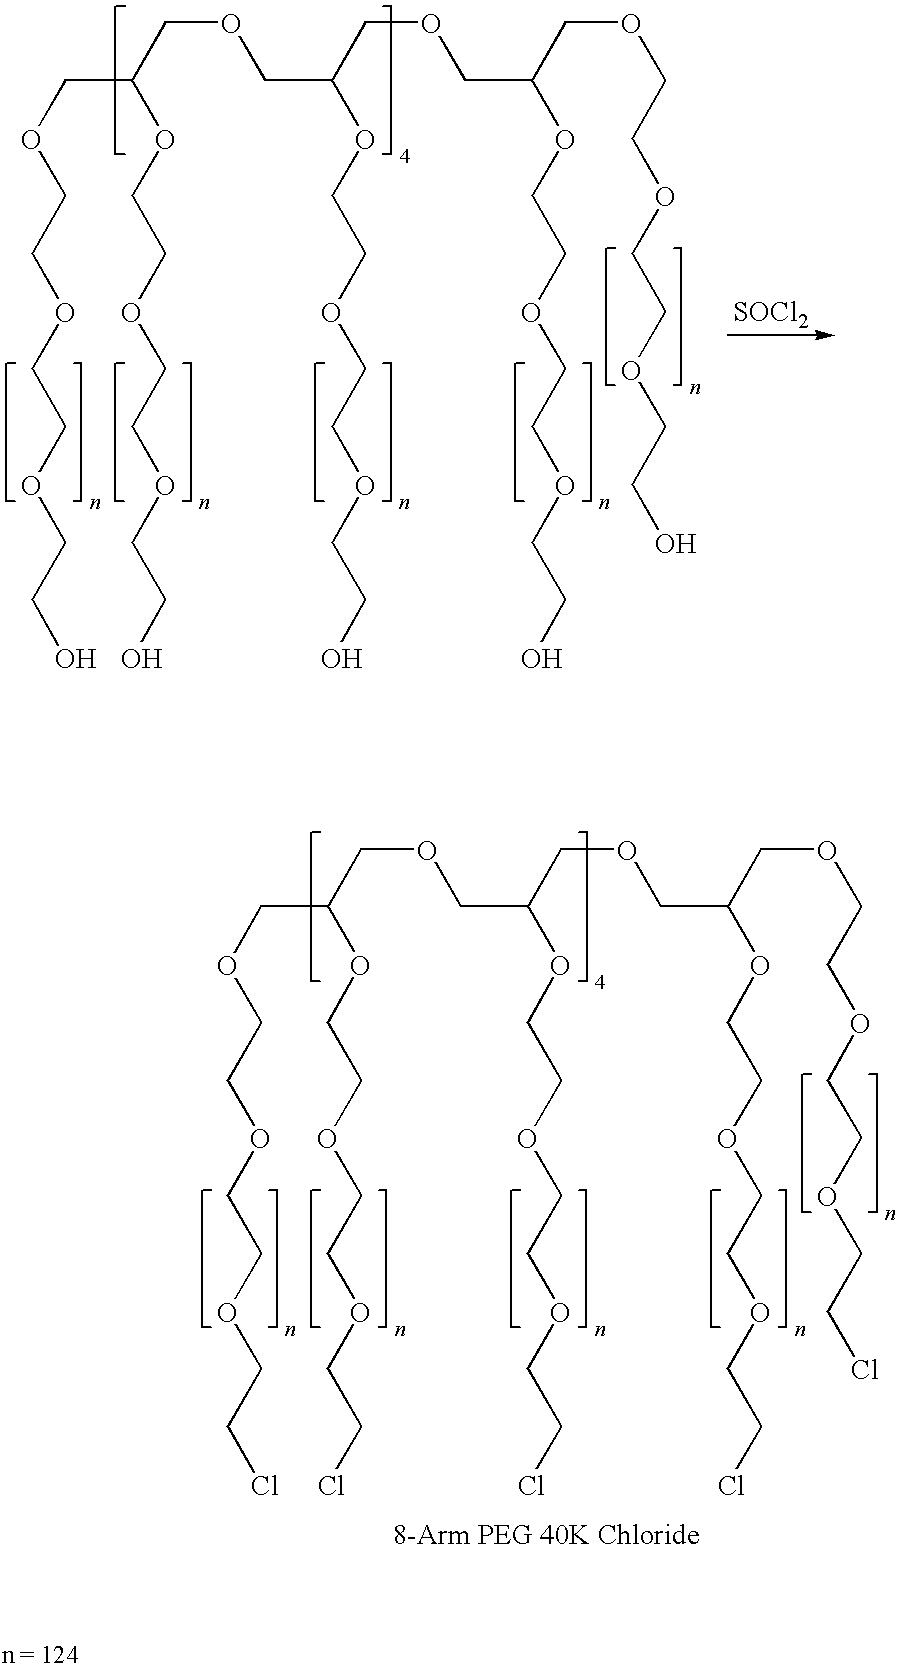 Method for preparing a hydrogel adhesive having extended gelation time and decreased degradation time